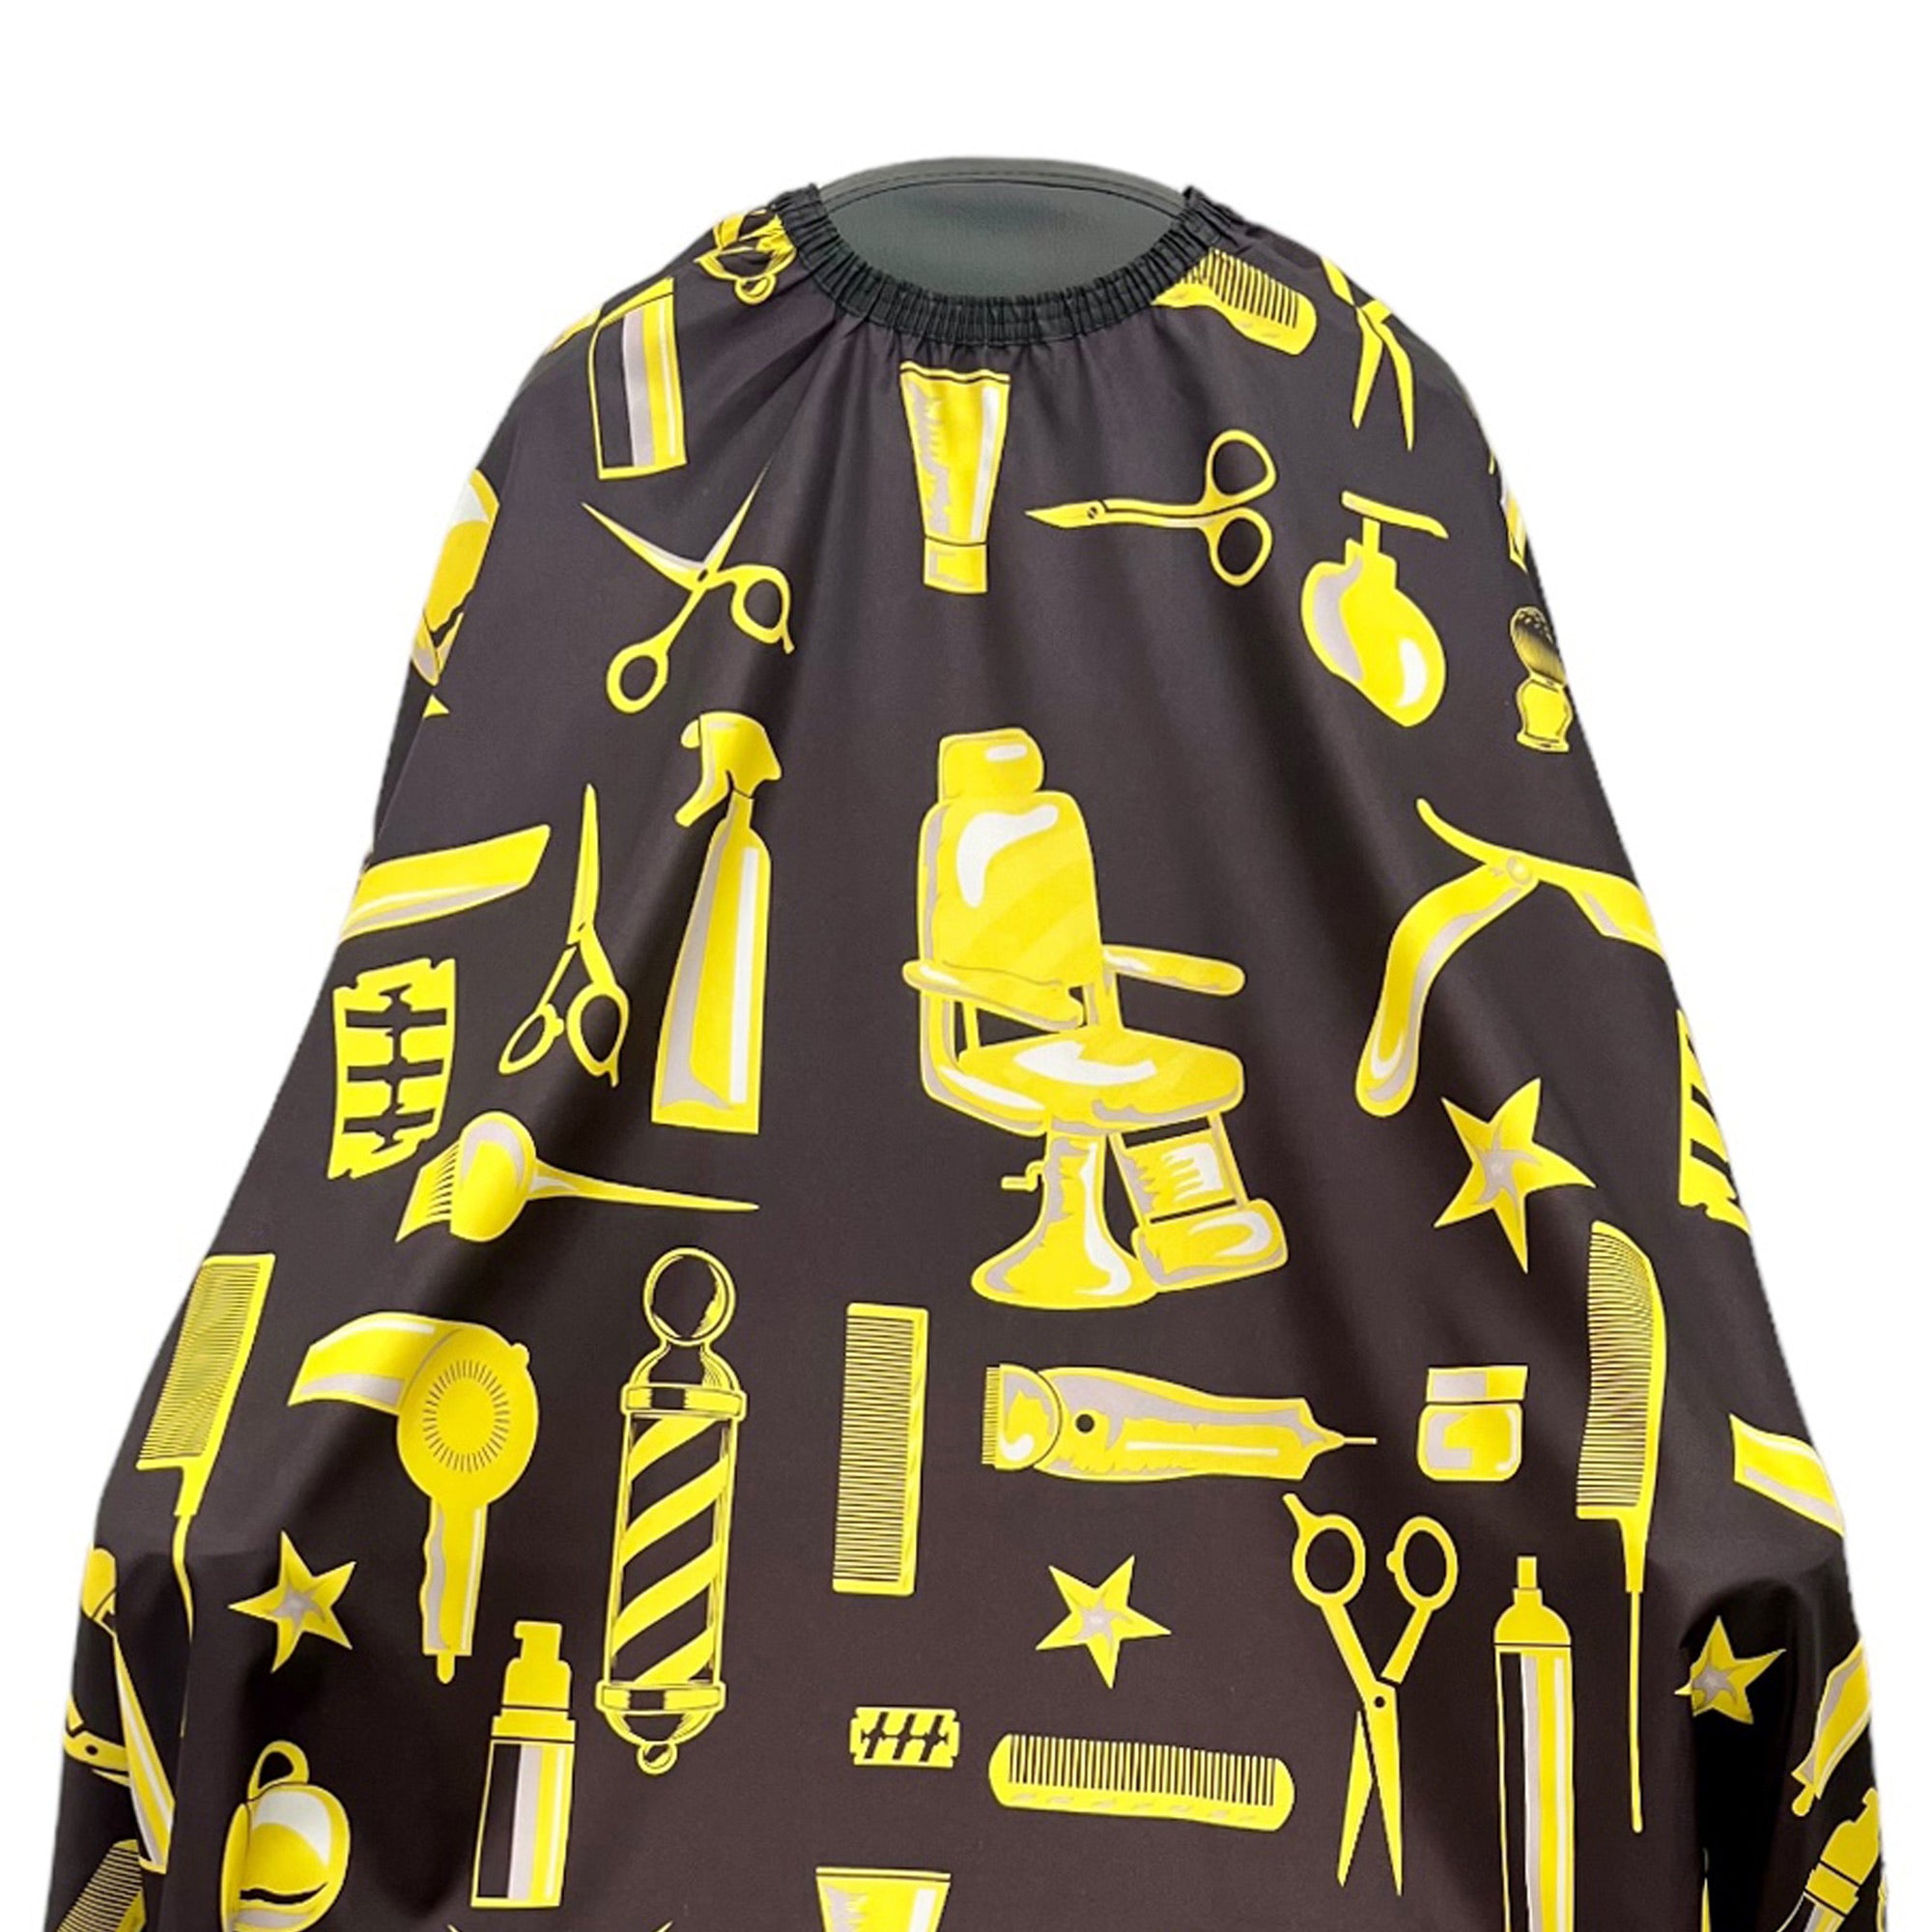 Gabri - Barber Hairdressing Hair Cutting Capes & Gowns Tools Pattern (Black & Yellow)